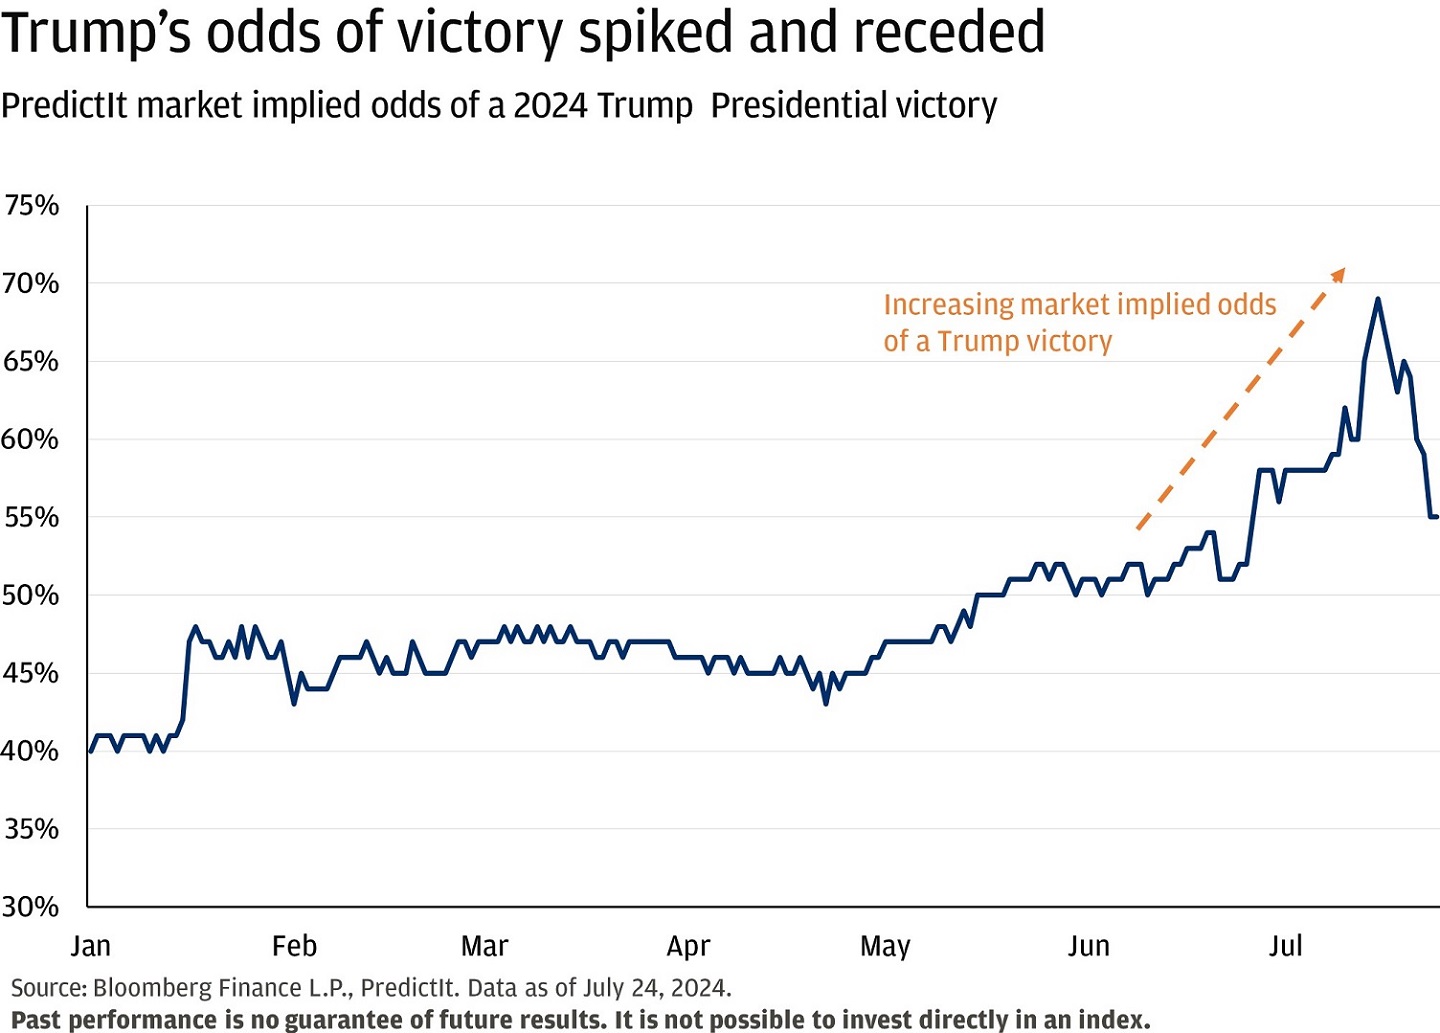 This chart shows the betting odds for a Trump victory in the 2024 Presidential election from January 2024 to the present.